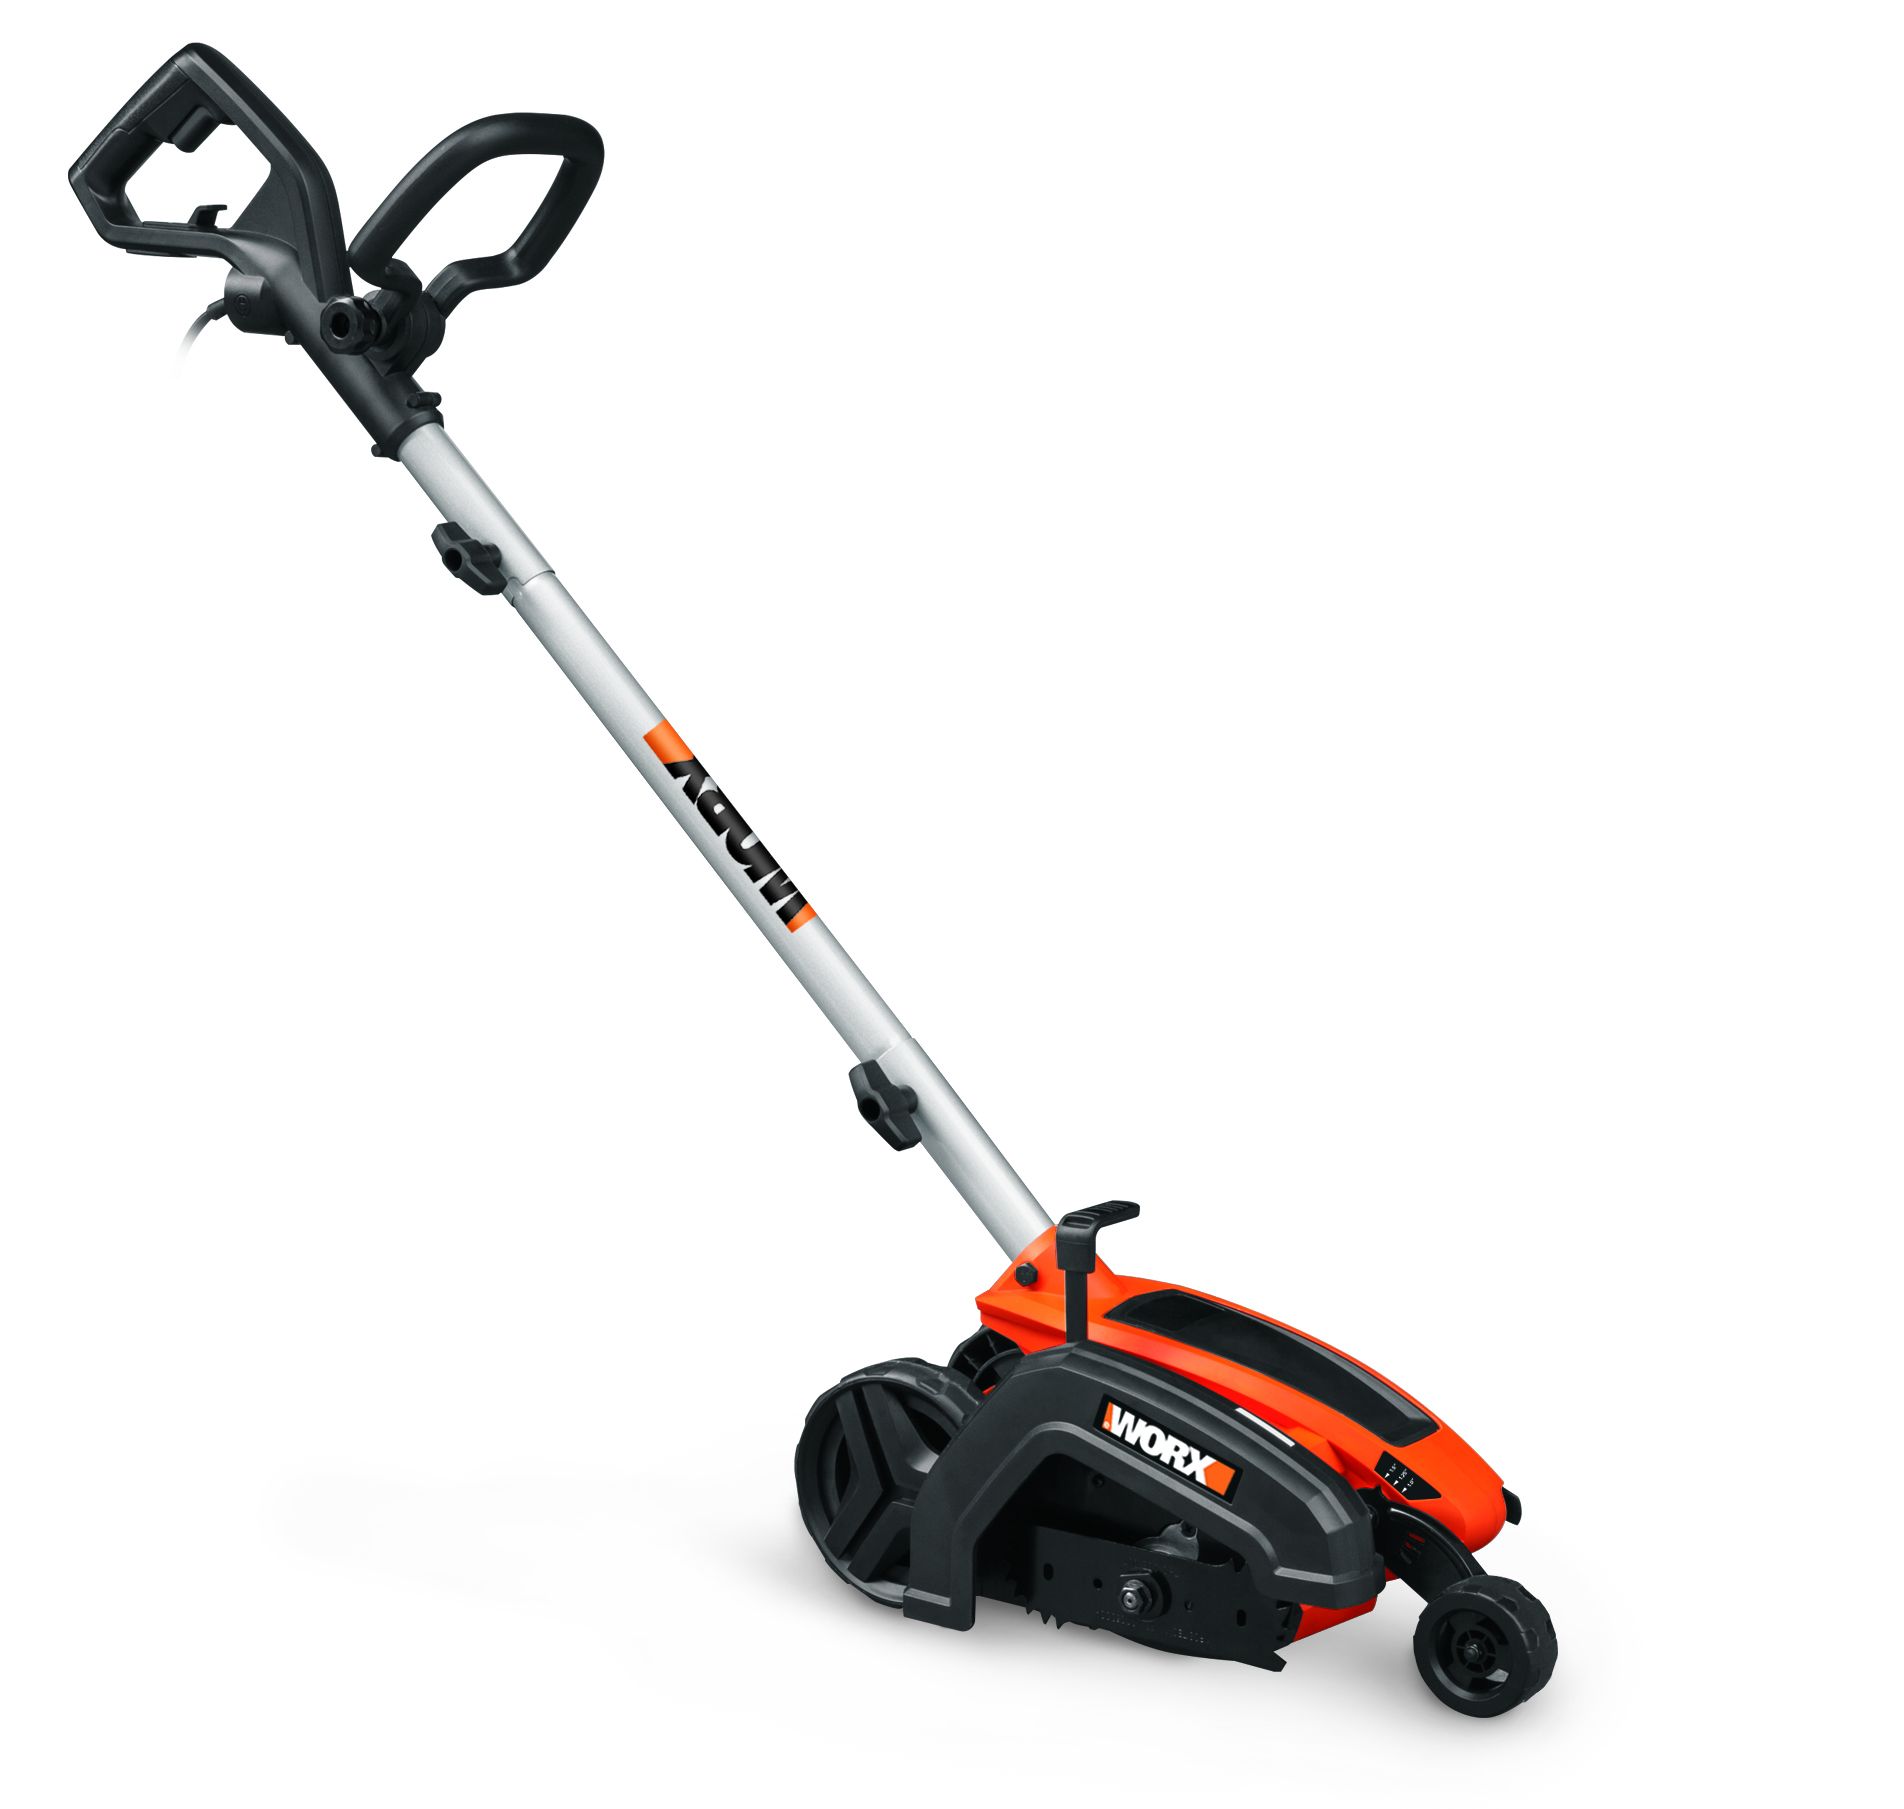 New WORX 12 Amp 2-in-1 Edger/Trencher Edges Sidewalks and Drives, Digs ...